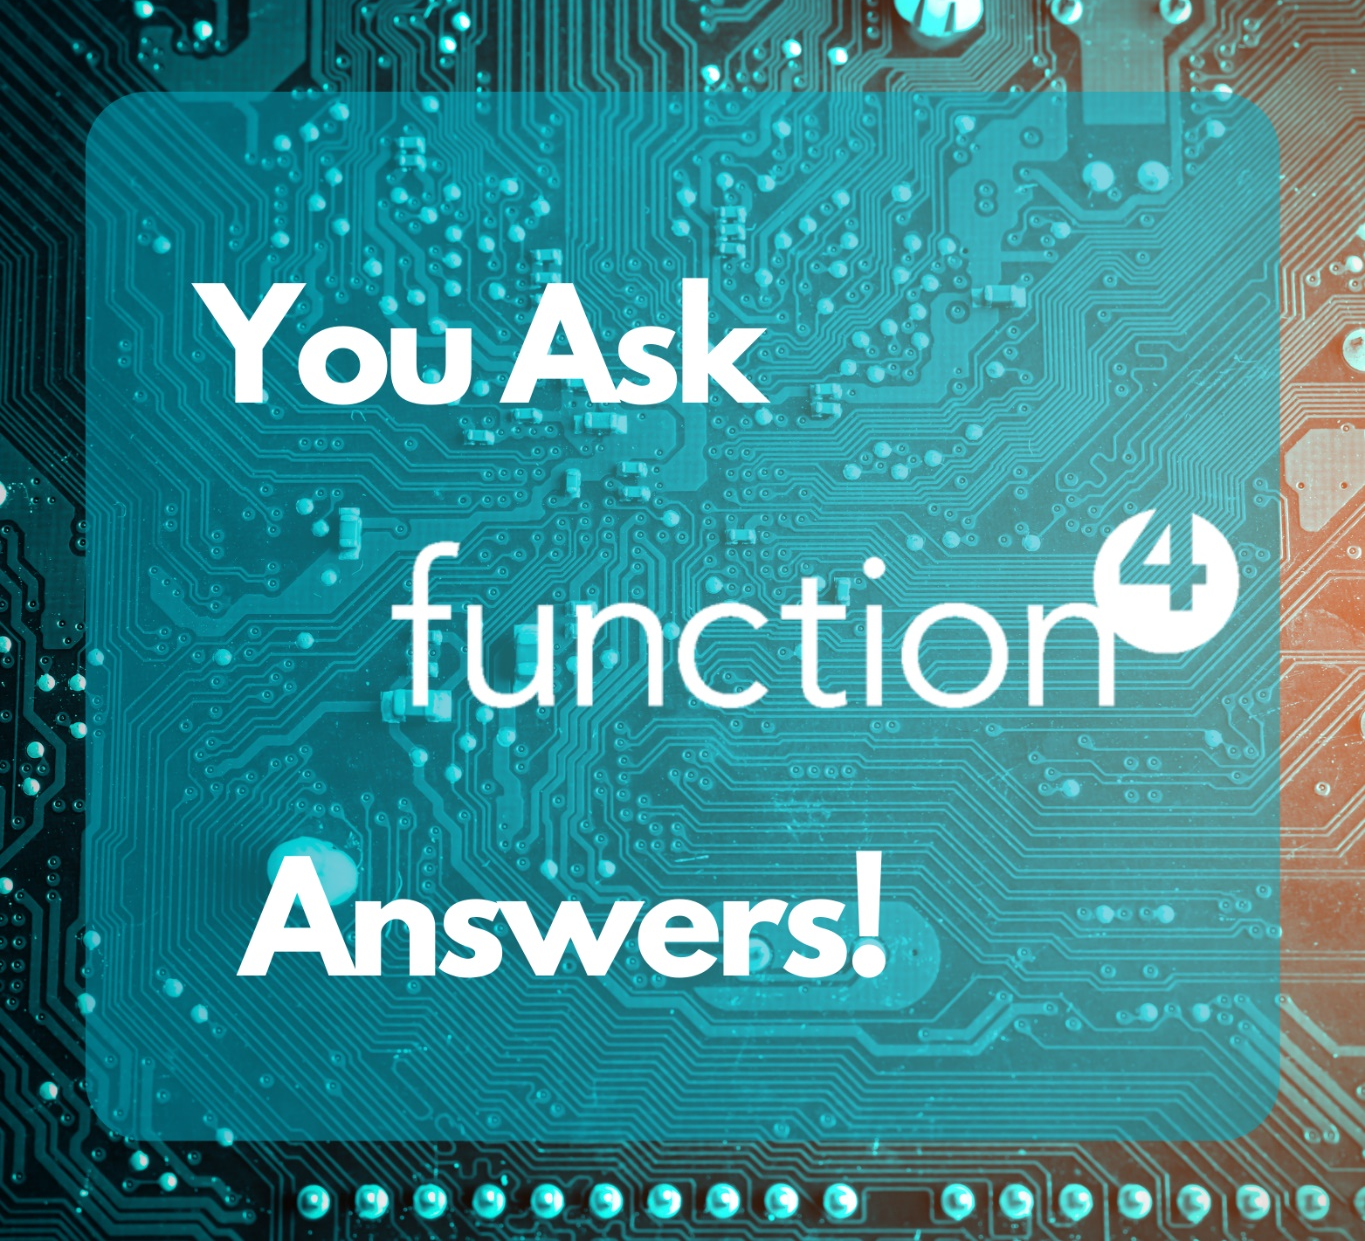 You Ask, Function4 Answers! graphic